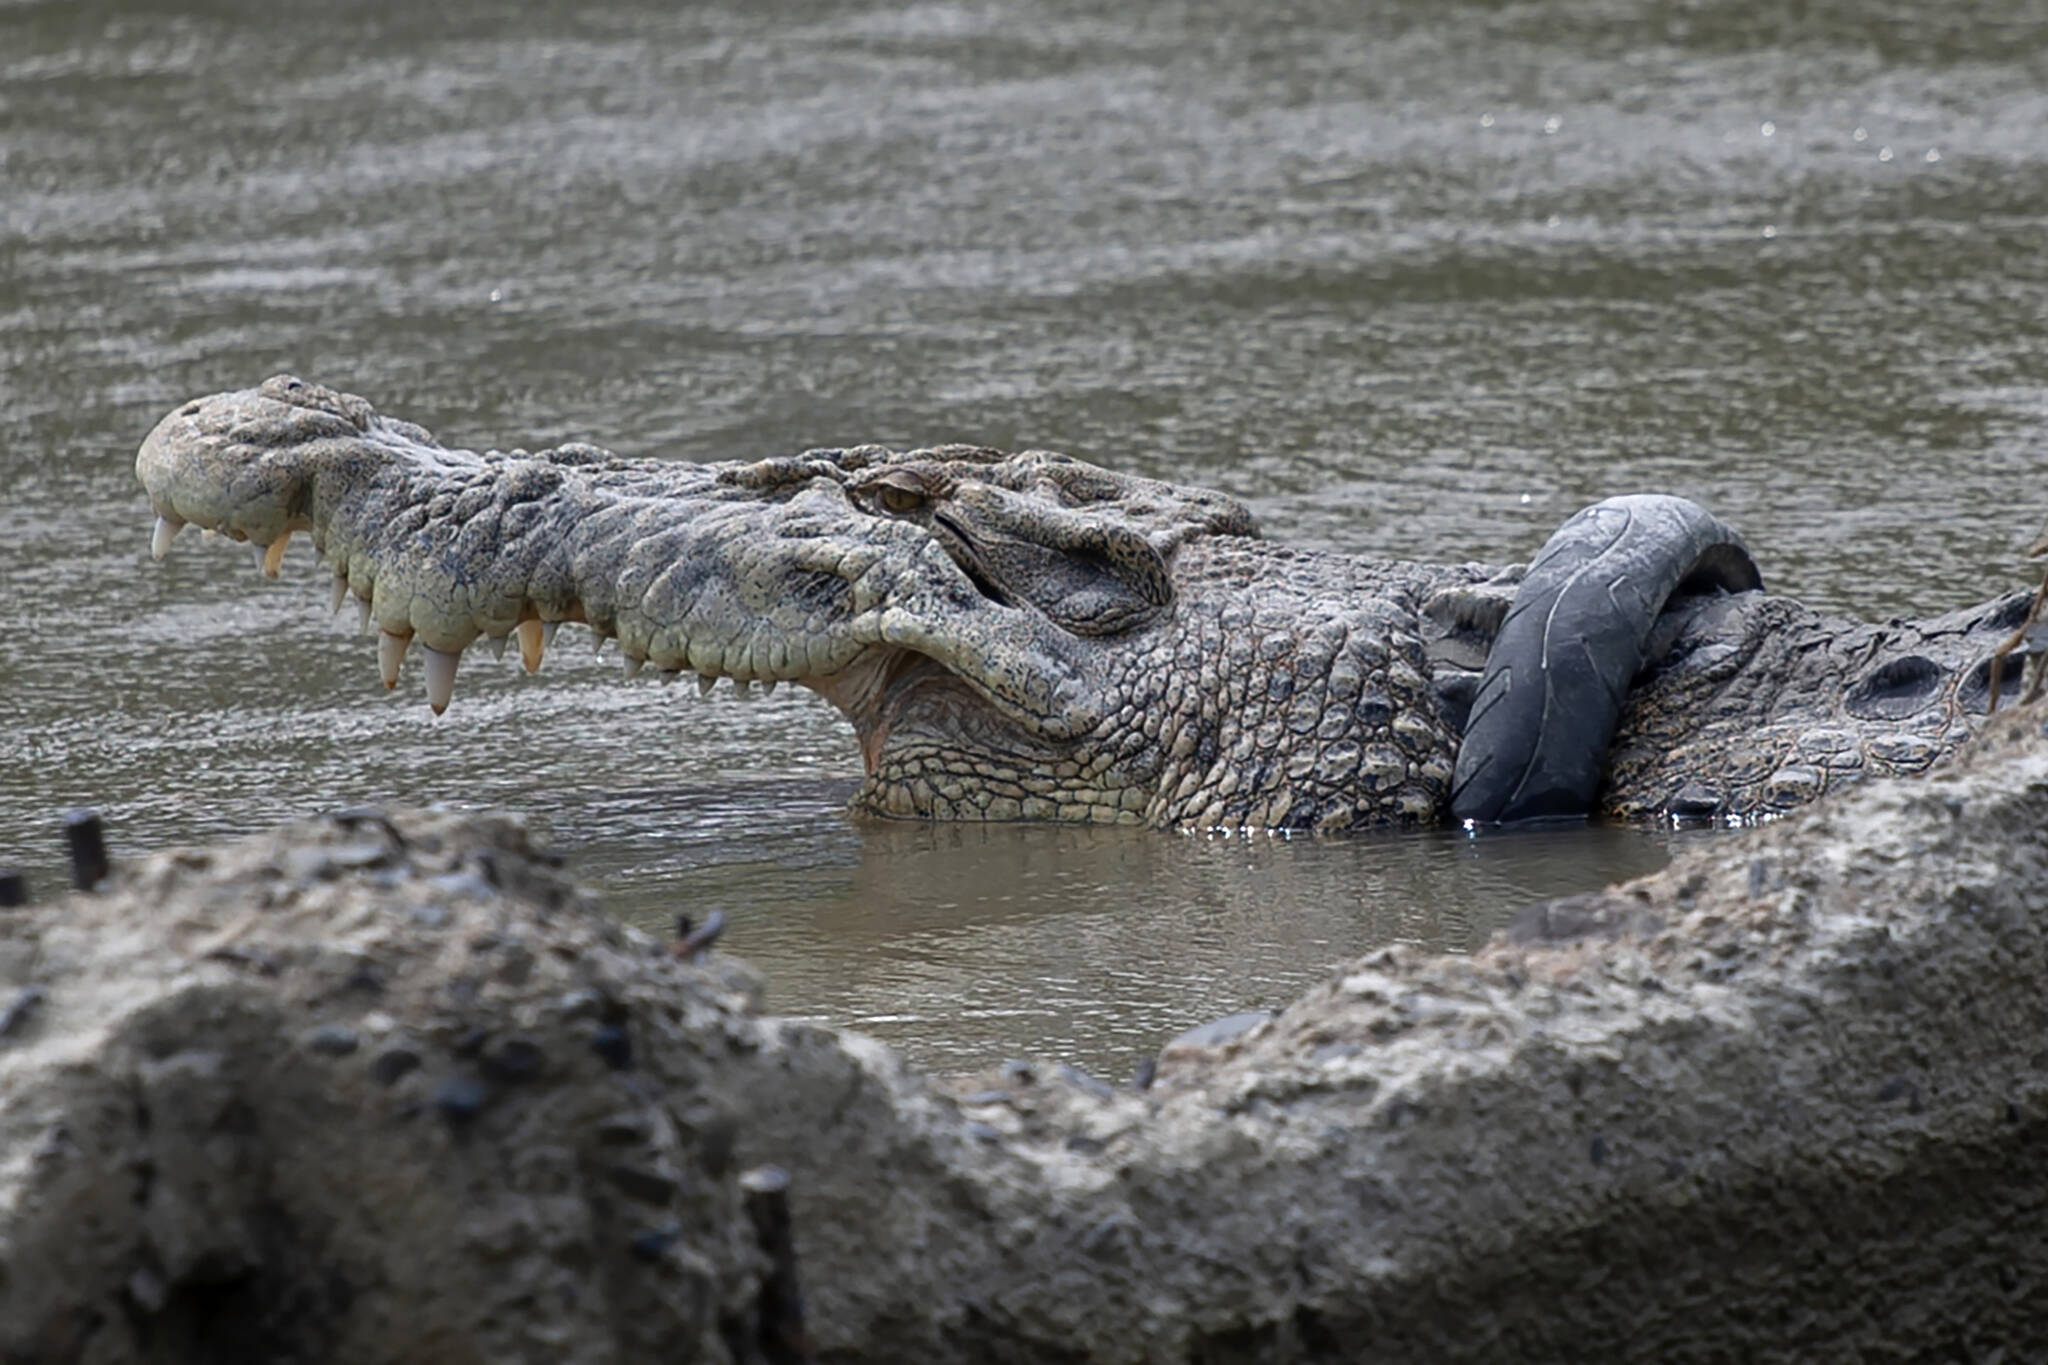 A crocodile with a motorcycle tire stuck around its neck basks on a riverbank in Palu, Central Sulawesi on Jan. 14, 2020. (AP Photo/Mohammad Taufan)